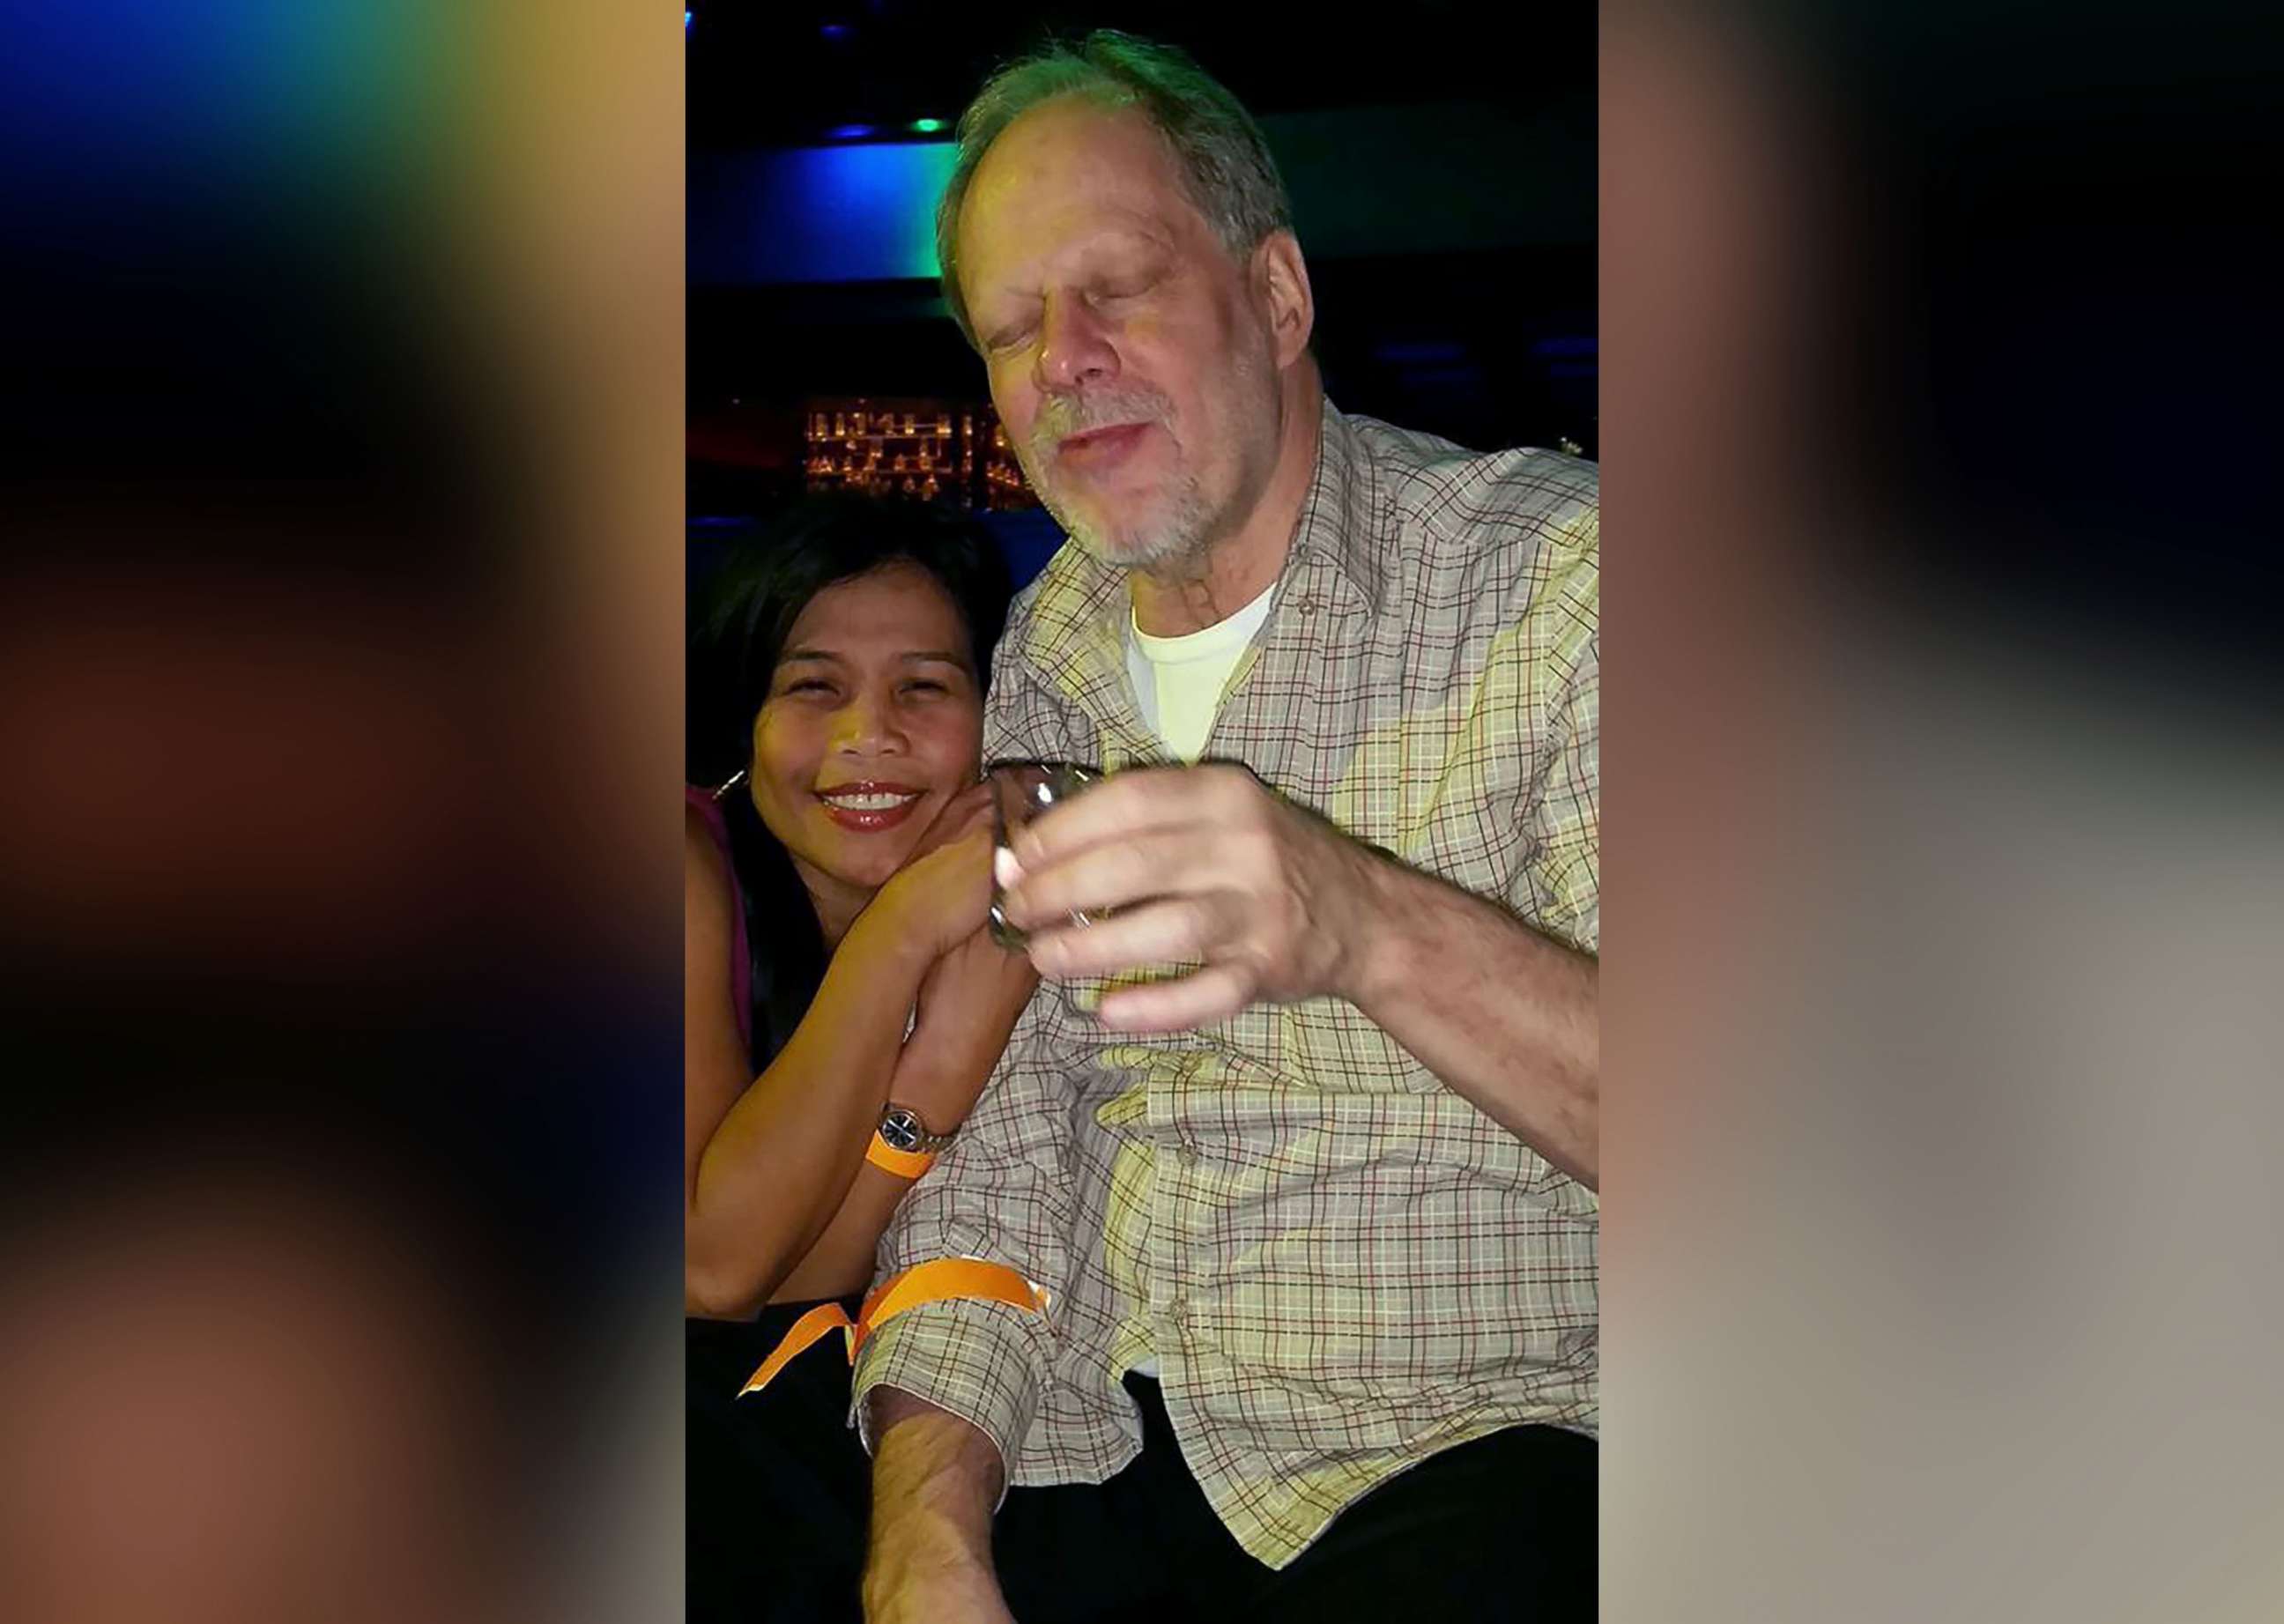 PHOTO: Stephen Paddock, seen here in a photo posted on Facebook by his girlfriend in September 2014, has been identified as the suspect in Sunday's mass shooting in Las Vegas.